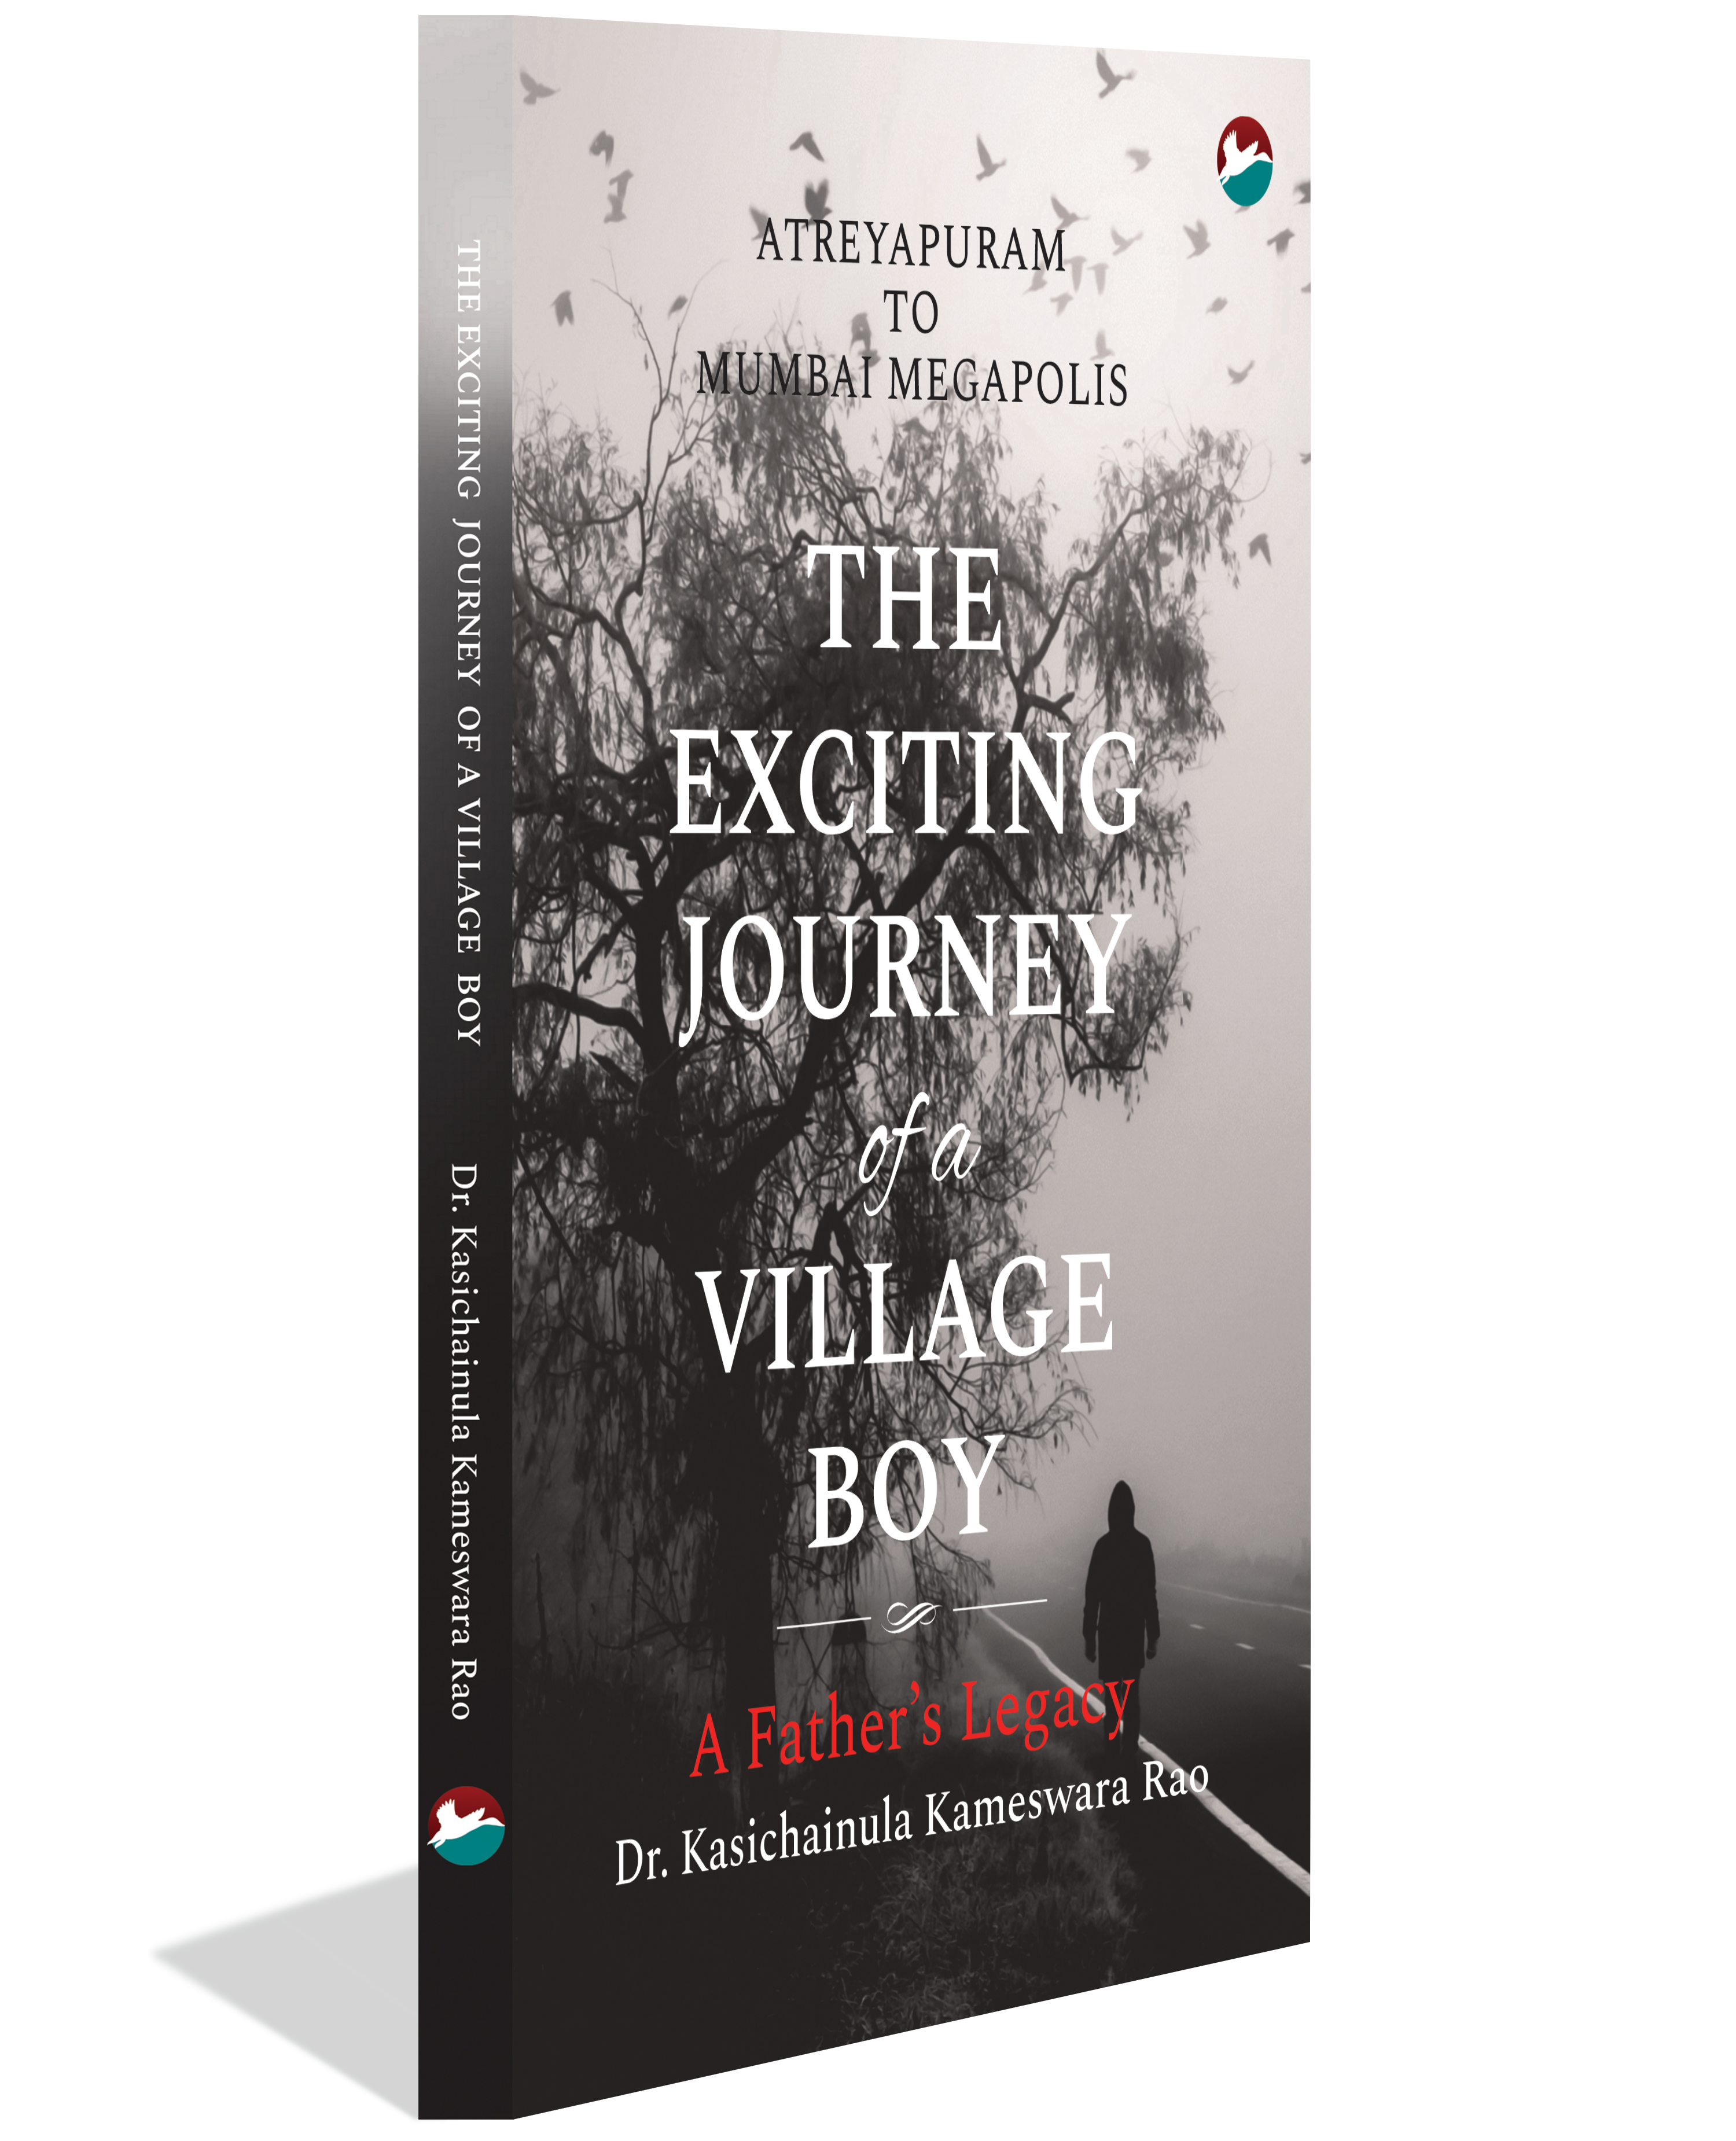 The Exciting Journey of a Village Boy